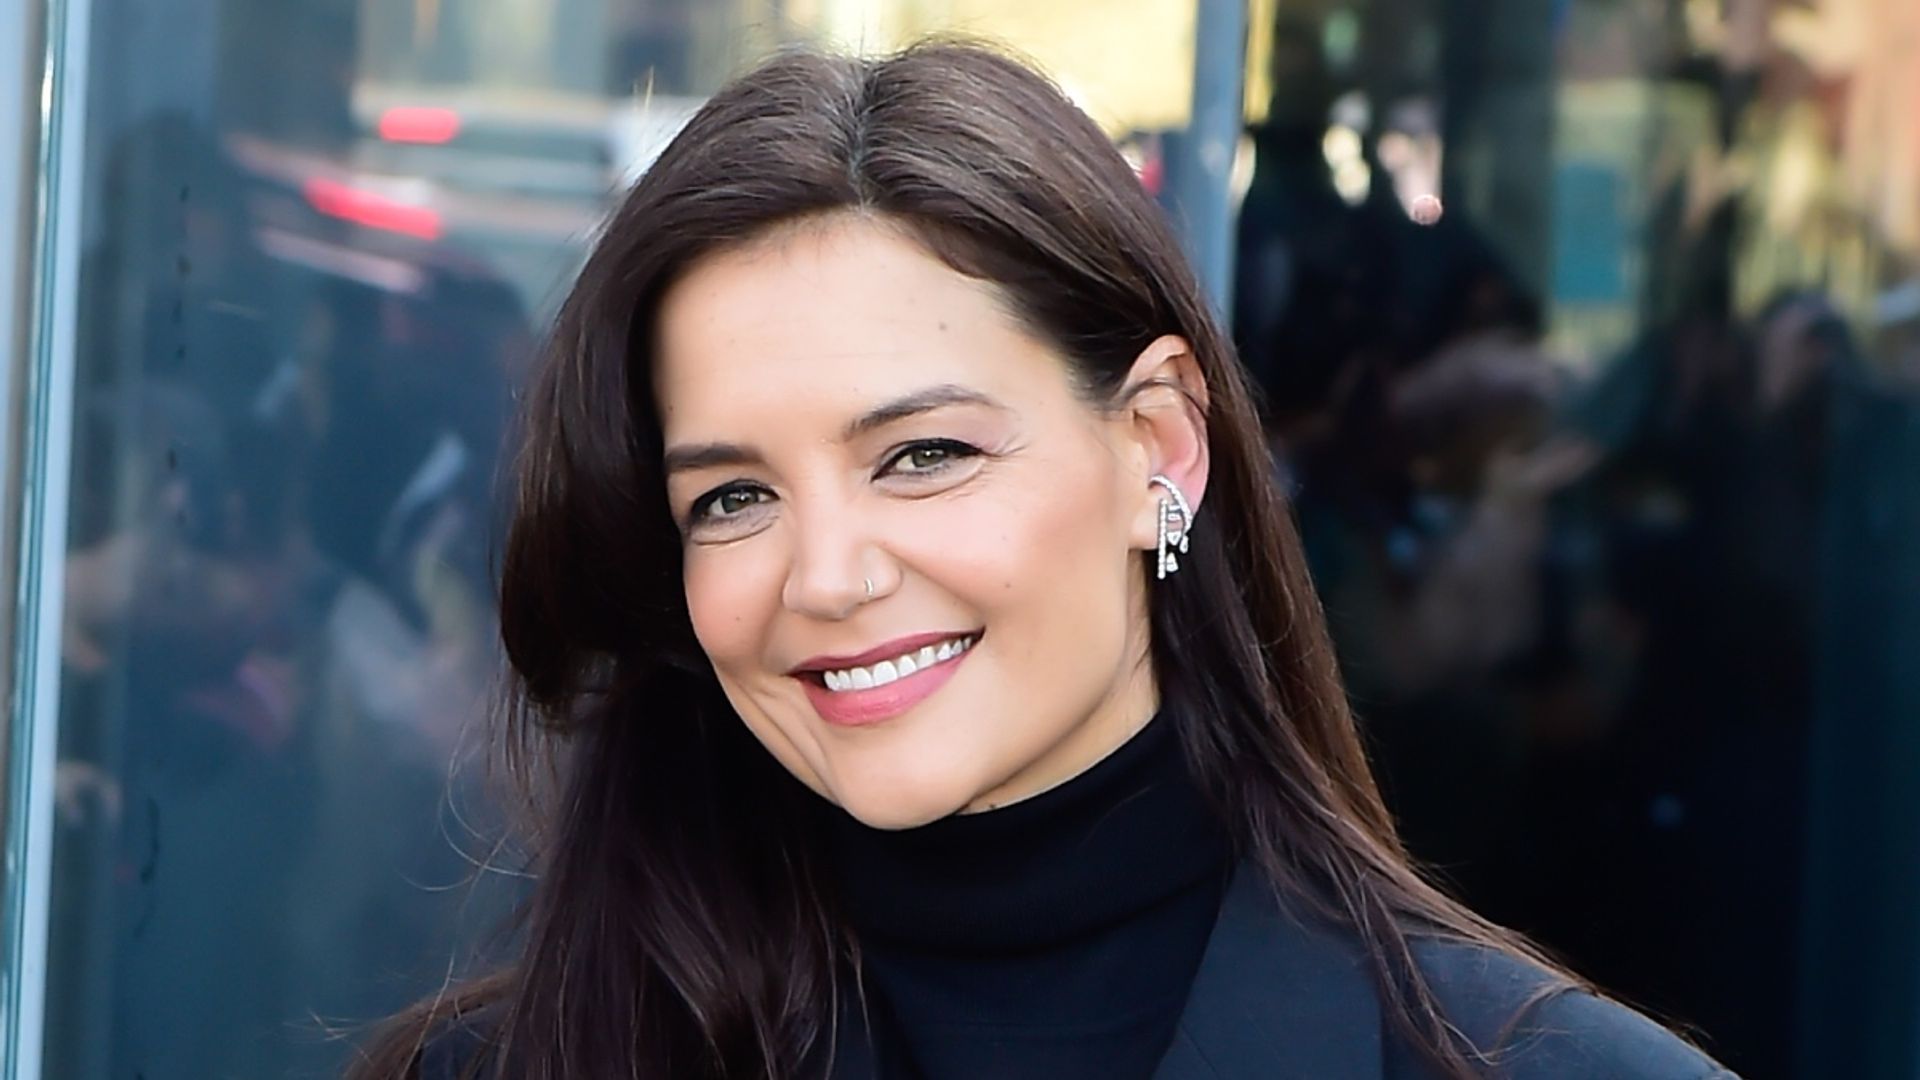 Katie Holmes opens up about private life with rarely-seen daughter Suri  Cruise – and it's so relatable